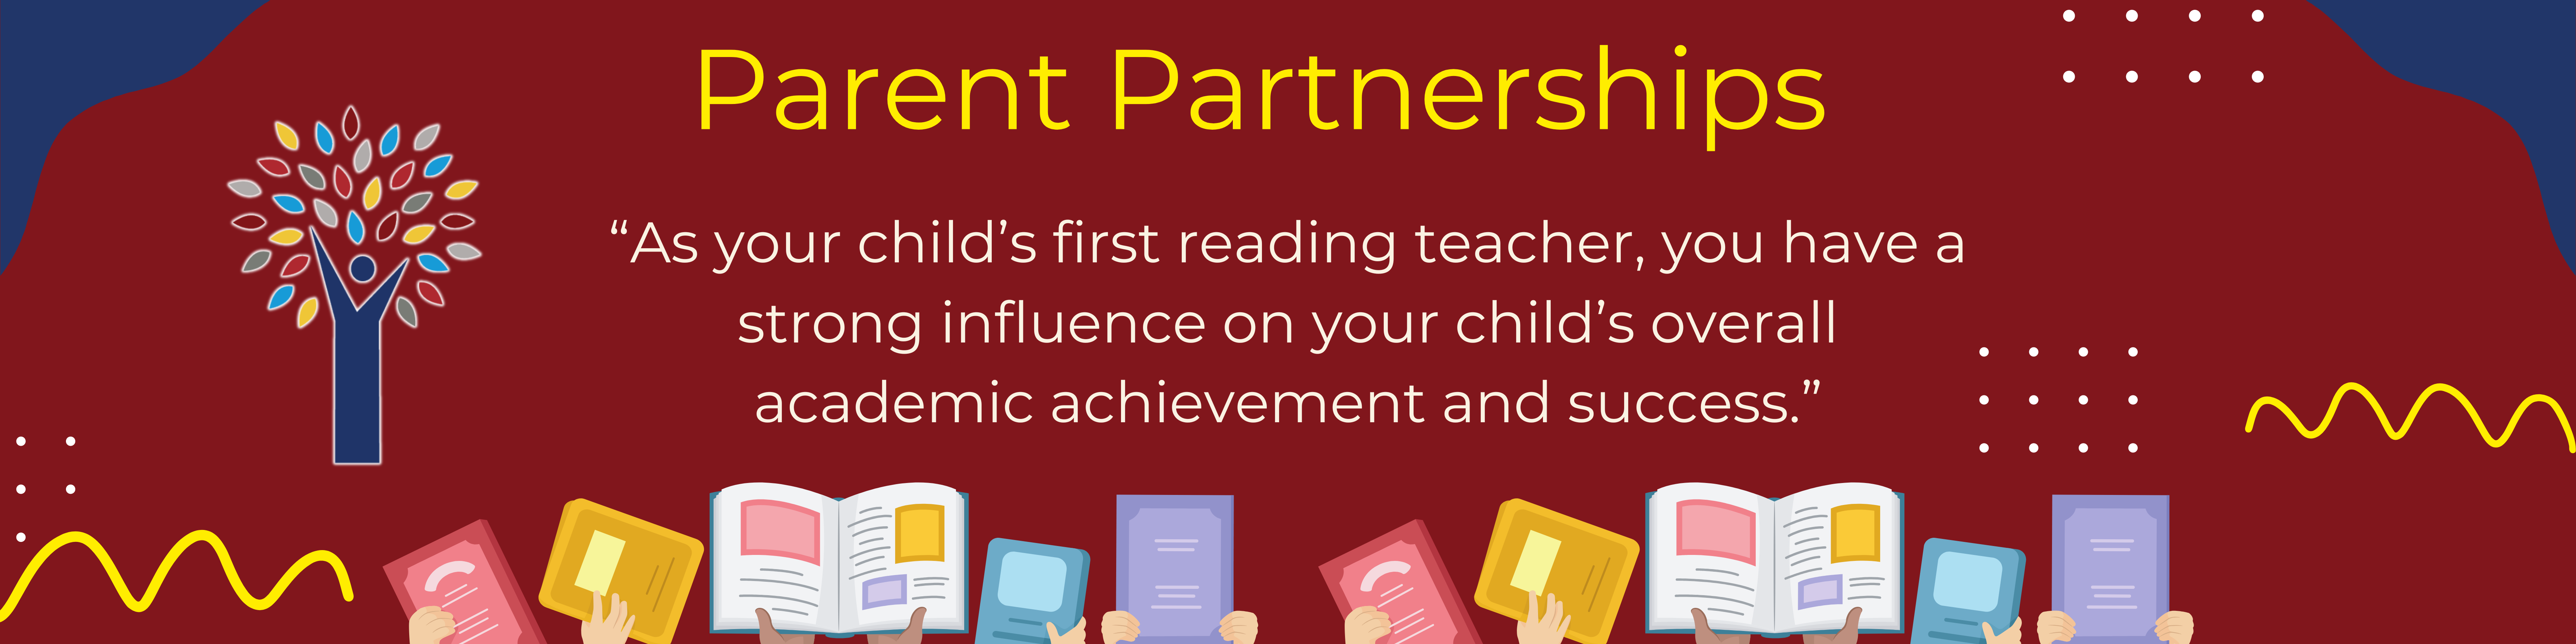 Parent Partnerships. "As your child's first reading teacher, you have a strong influence on your child's overall academic achievement and success."